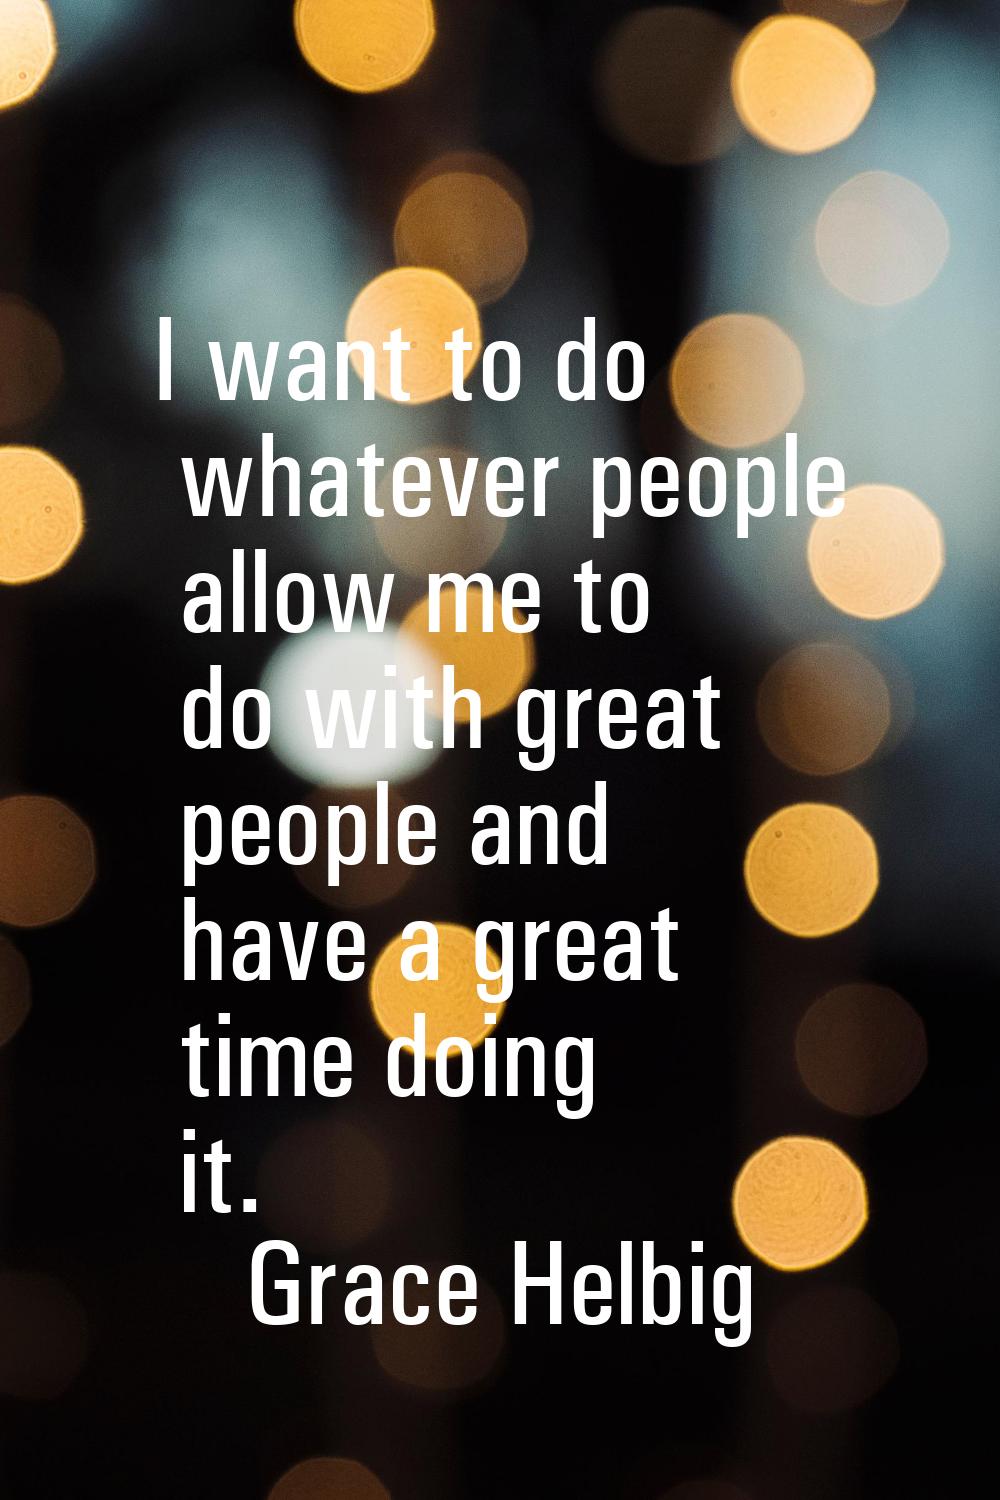 I want to do whatever people allow me to do with great people and have a great time doing it.